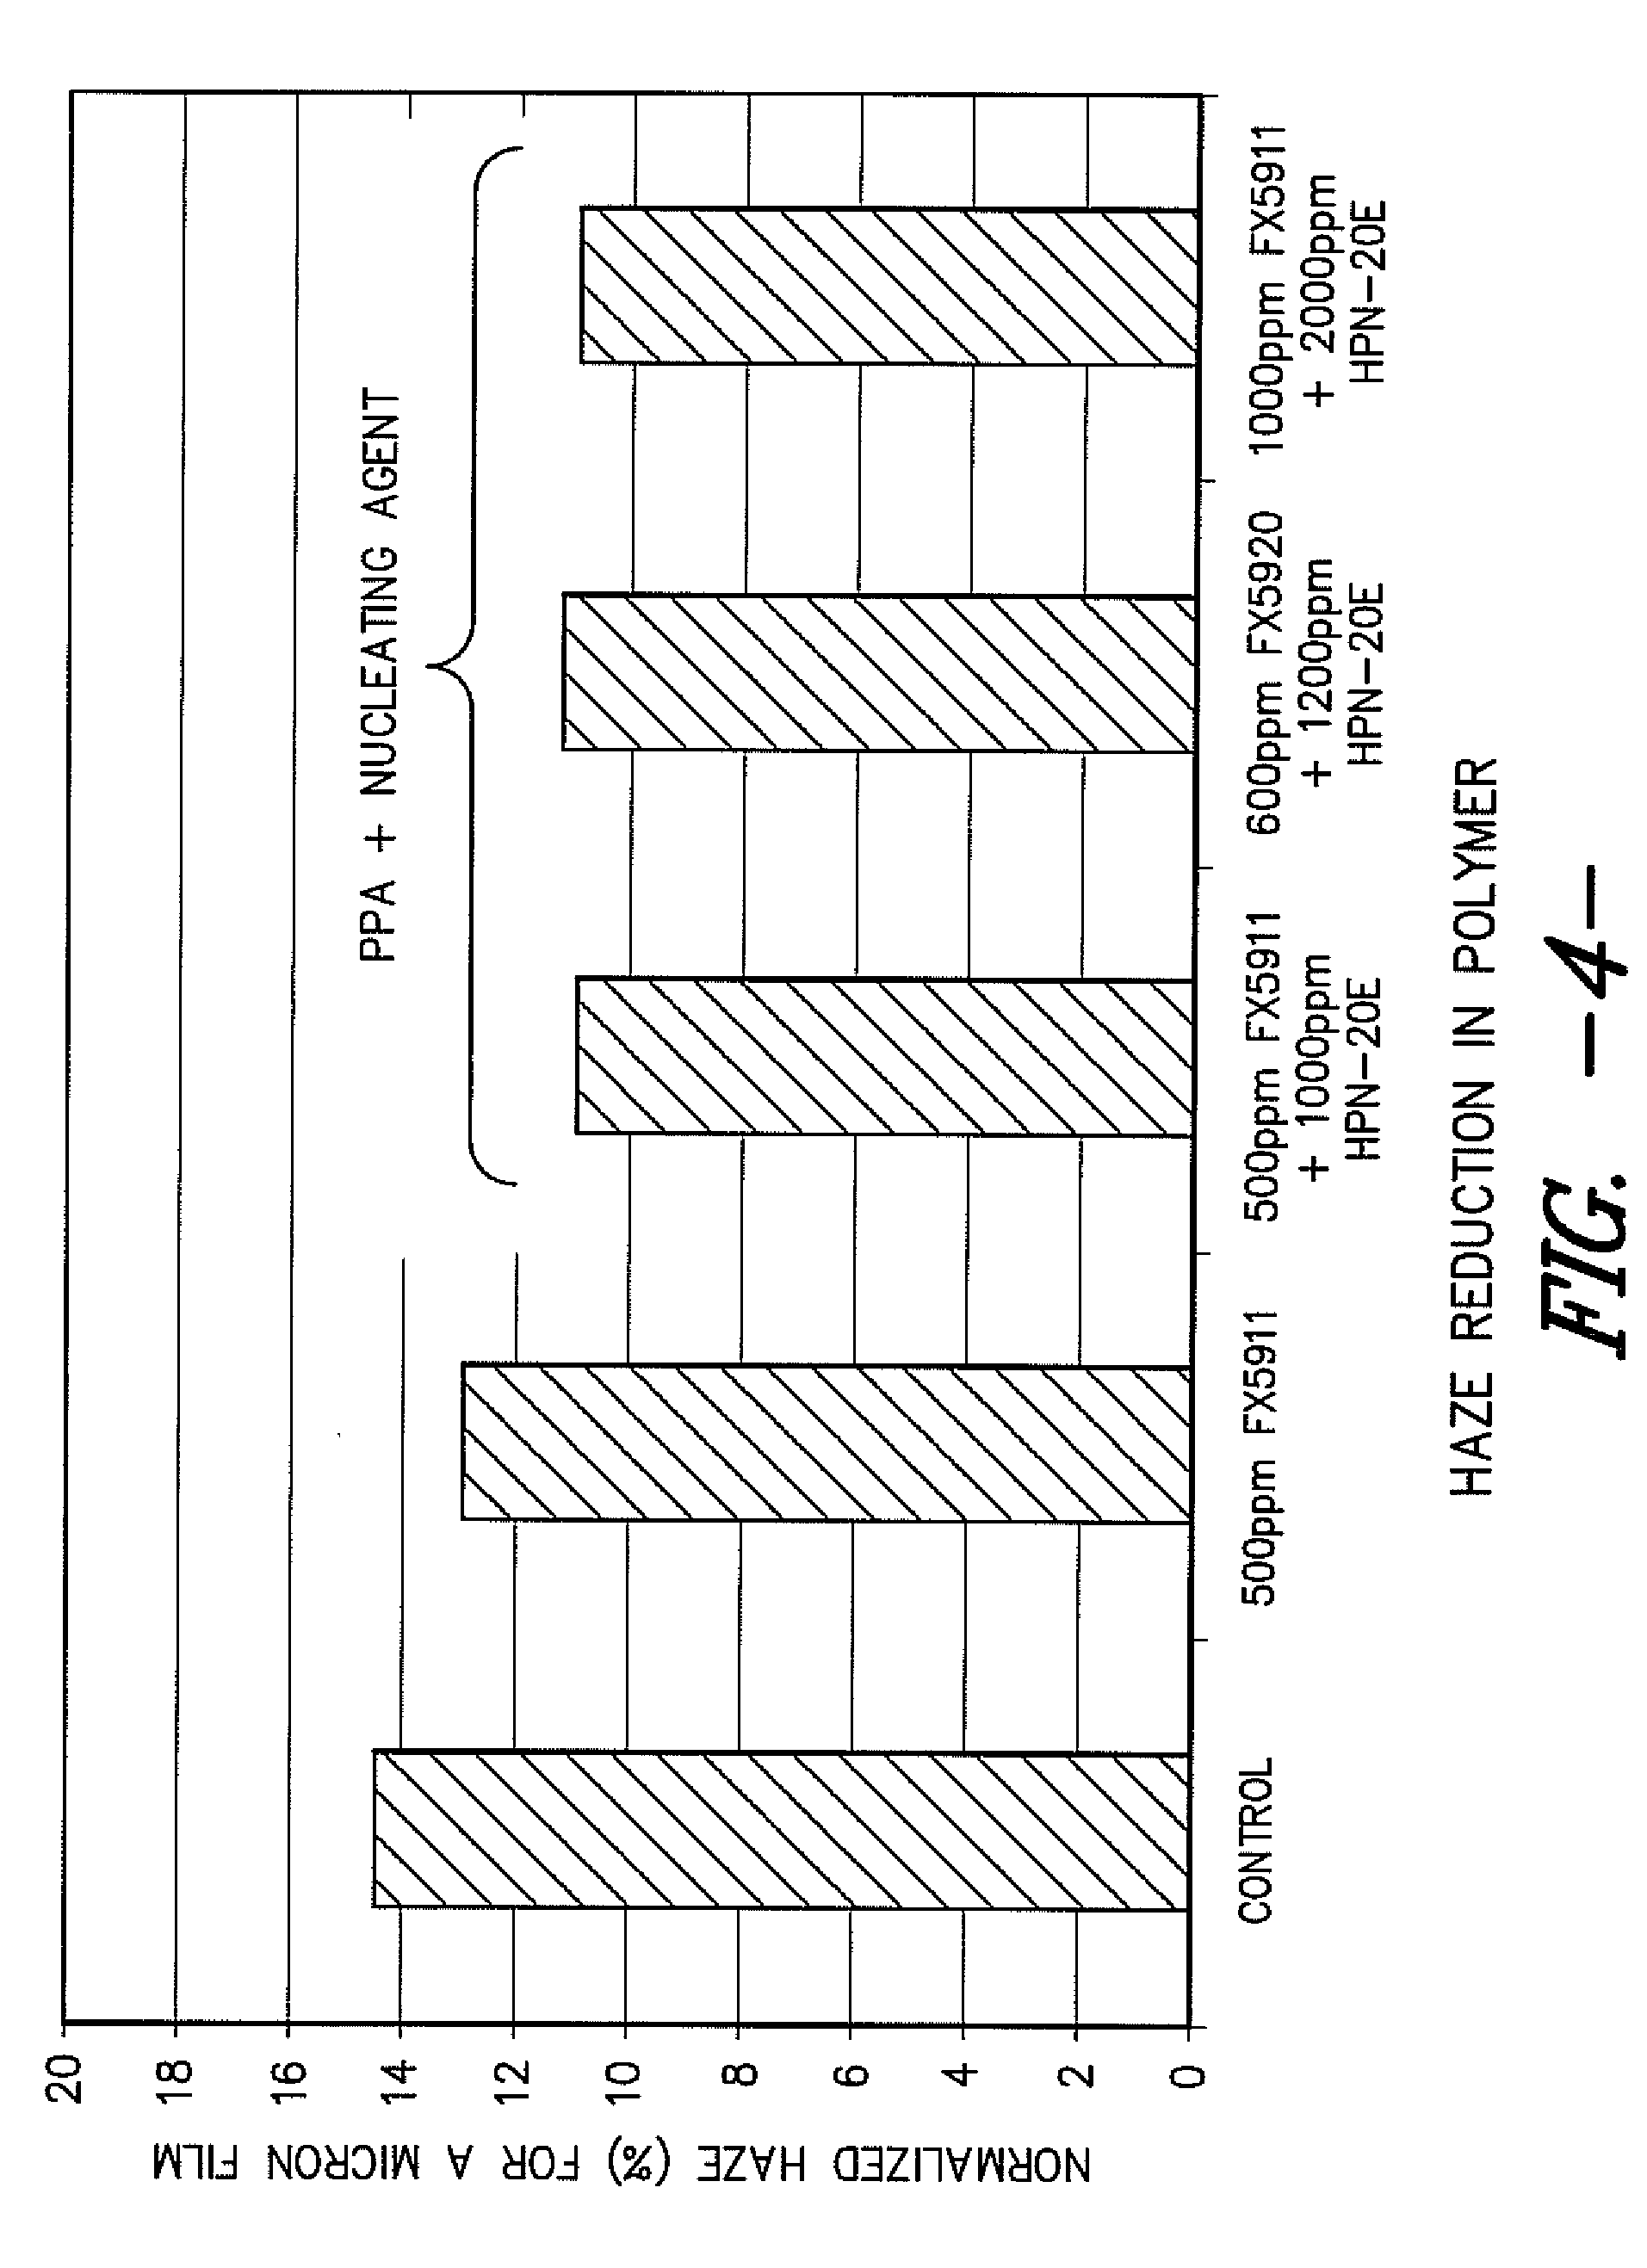 Polymer additive compositions and methods